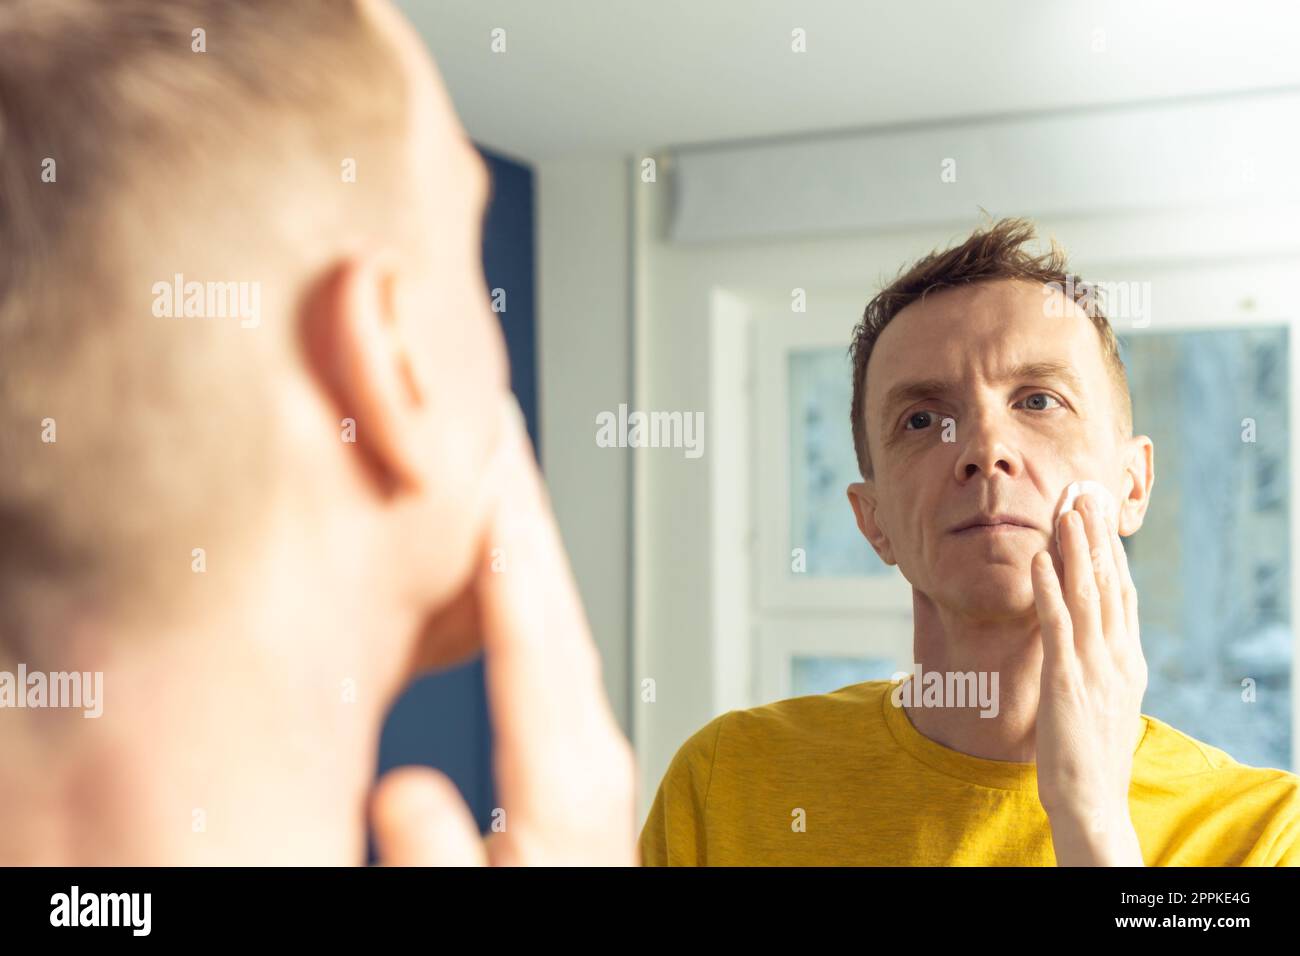 Mature man apply face tonic with cotton pad, then massage with hands. Male portrait in mirror. Face cleansing, washing. Stock Photo